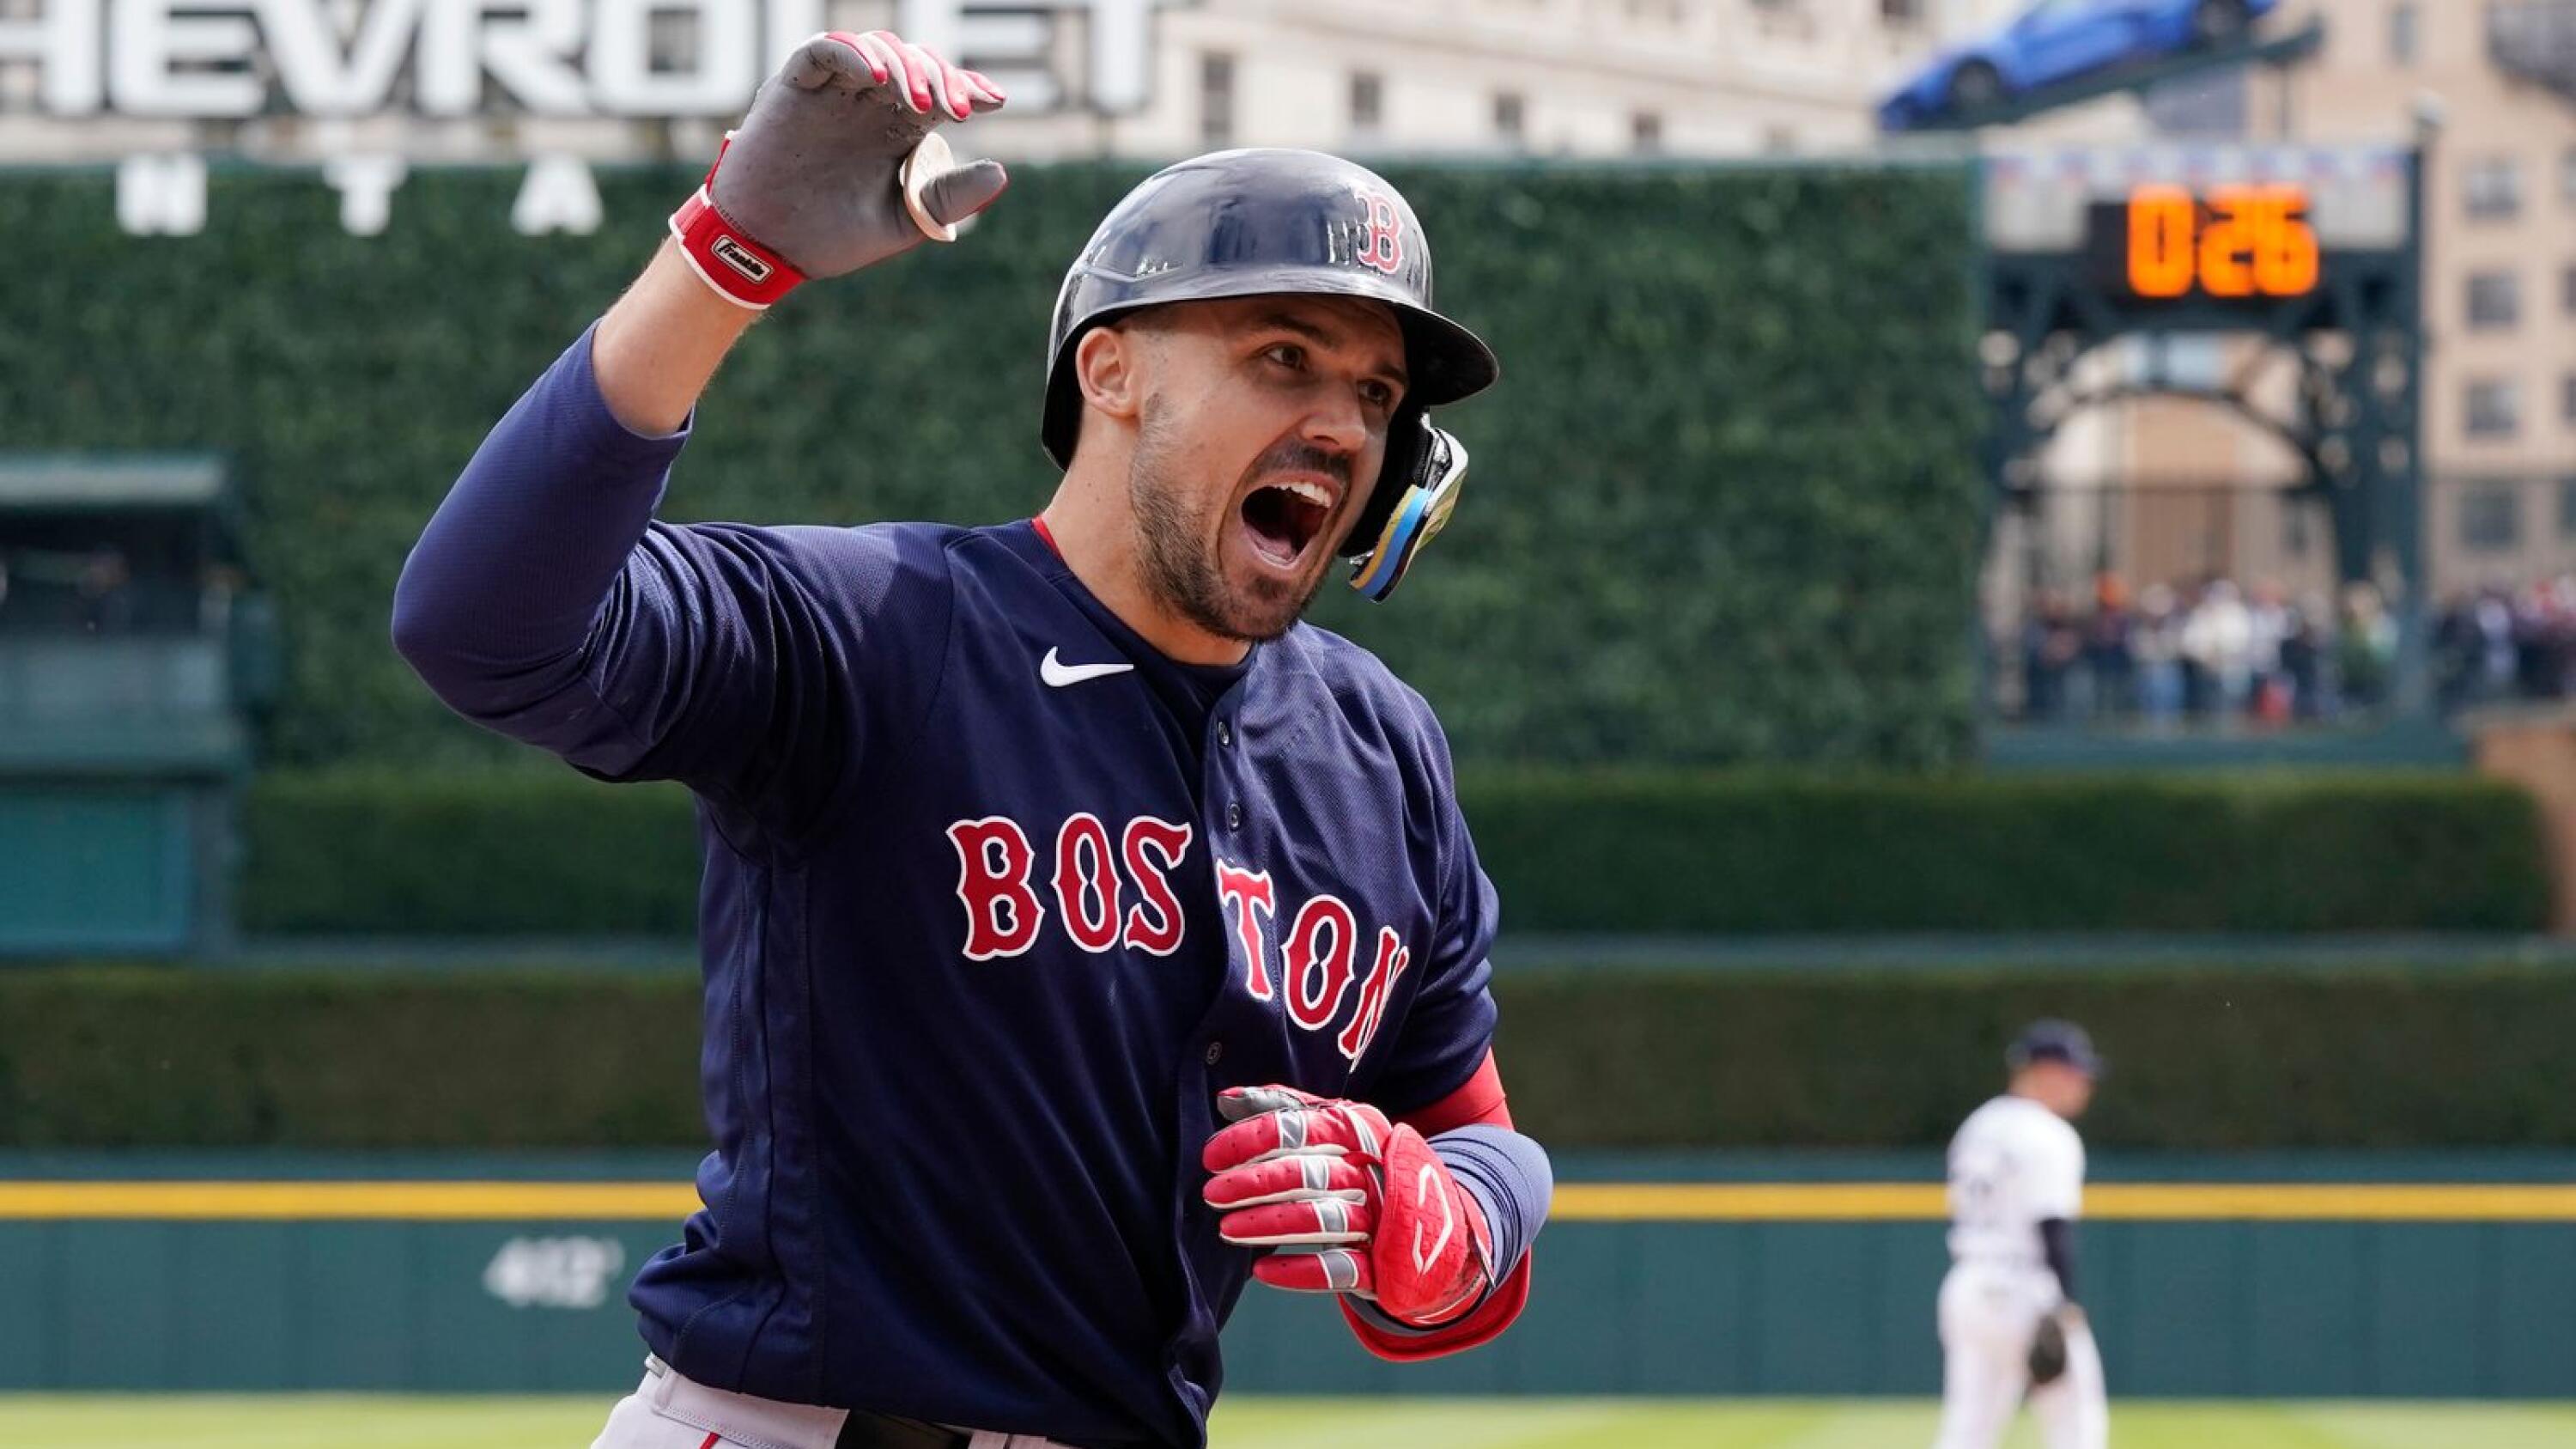 WATCH: Boston Red Sox' Adam Duvall Hits Long Home Run to Give Sox Lead vs.  Detroit Tigers - Fastball